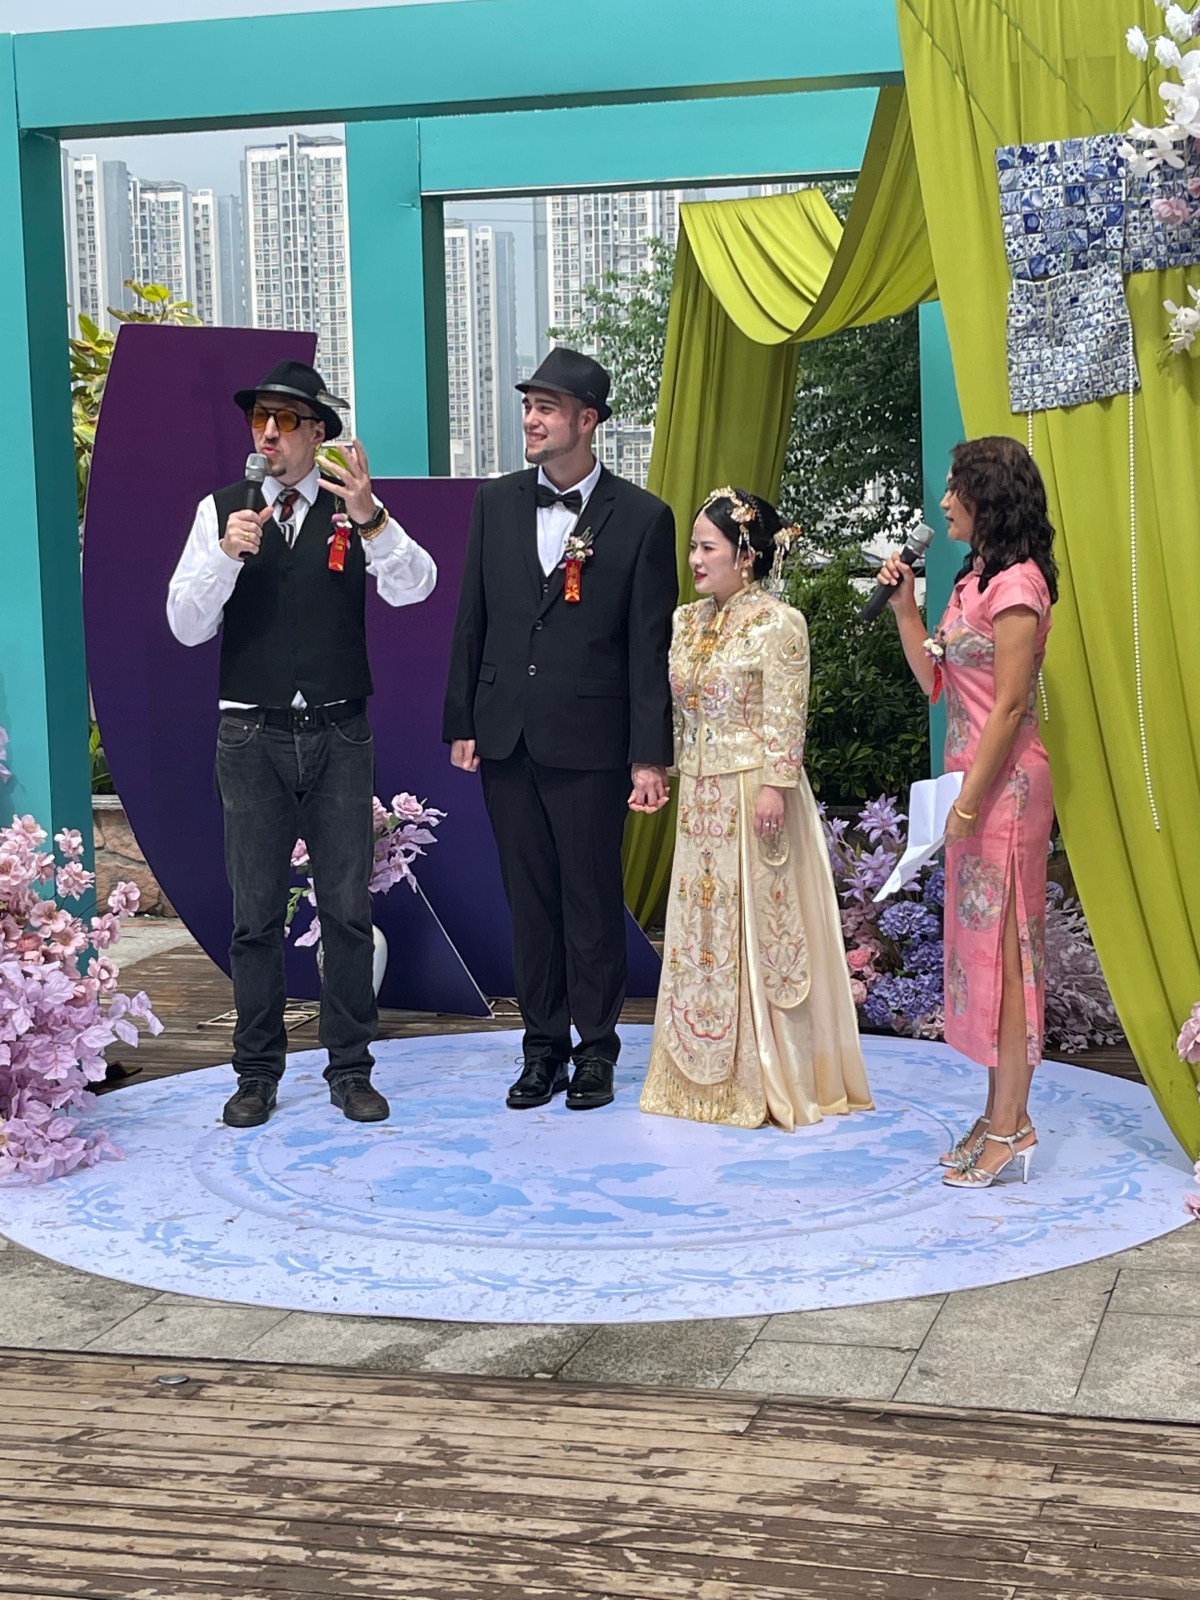 Kai doing standup comedy at the wedding of an American and Chongqing Chinese friend he introduced.